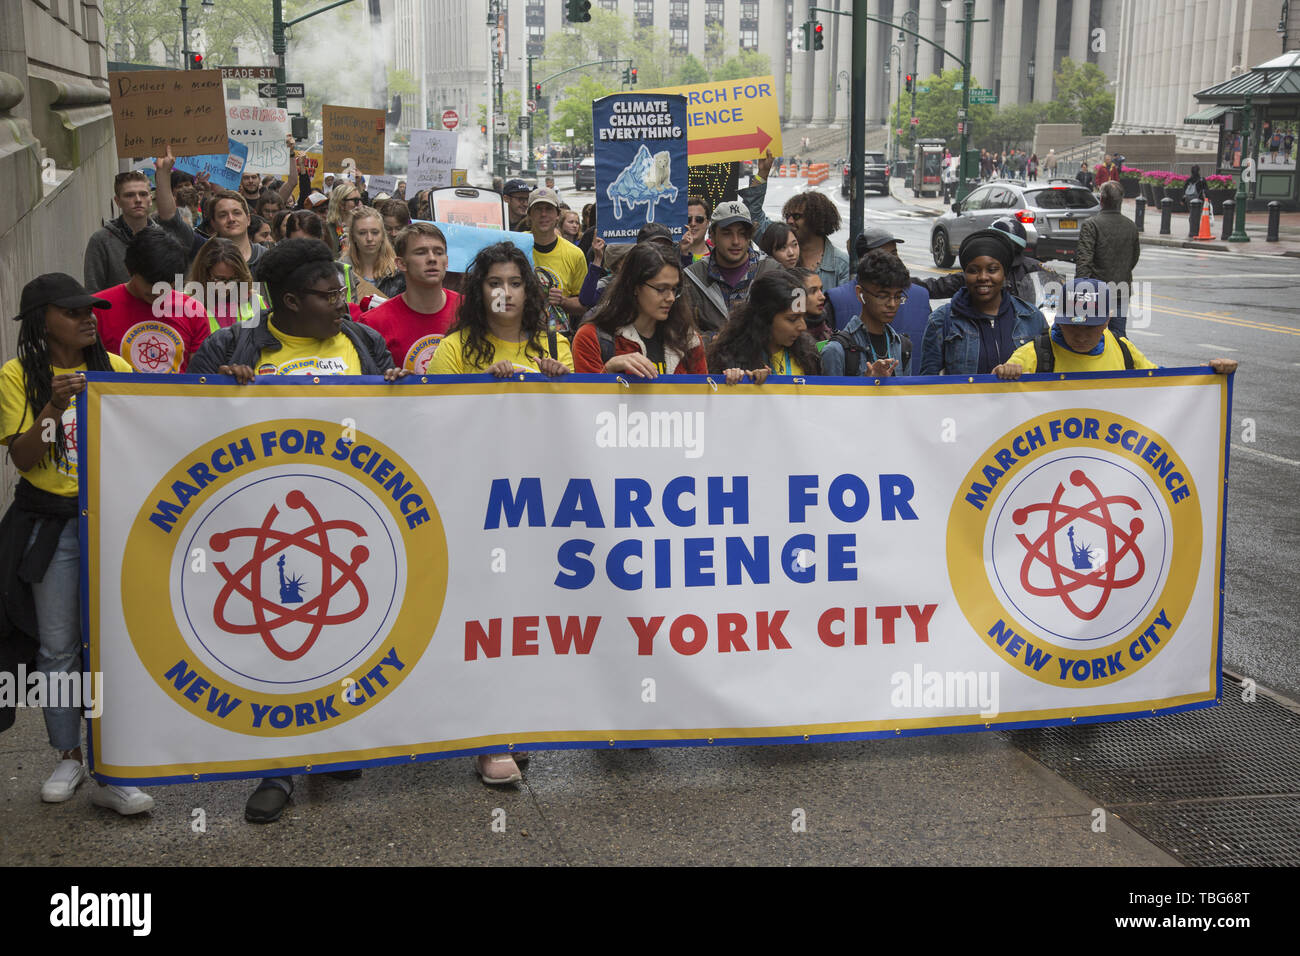 March for Science, New York City. The March for Science is an international series of rallies and marches held on Earth Day. The inaugural march was held on April 22, 2017 in Washington, D.C. It is a global movement that advocates for equitable, evidence-based policy that serves all communities. Stock Photo